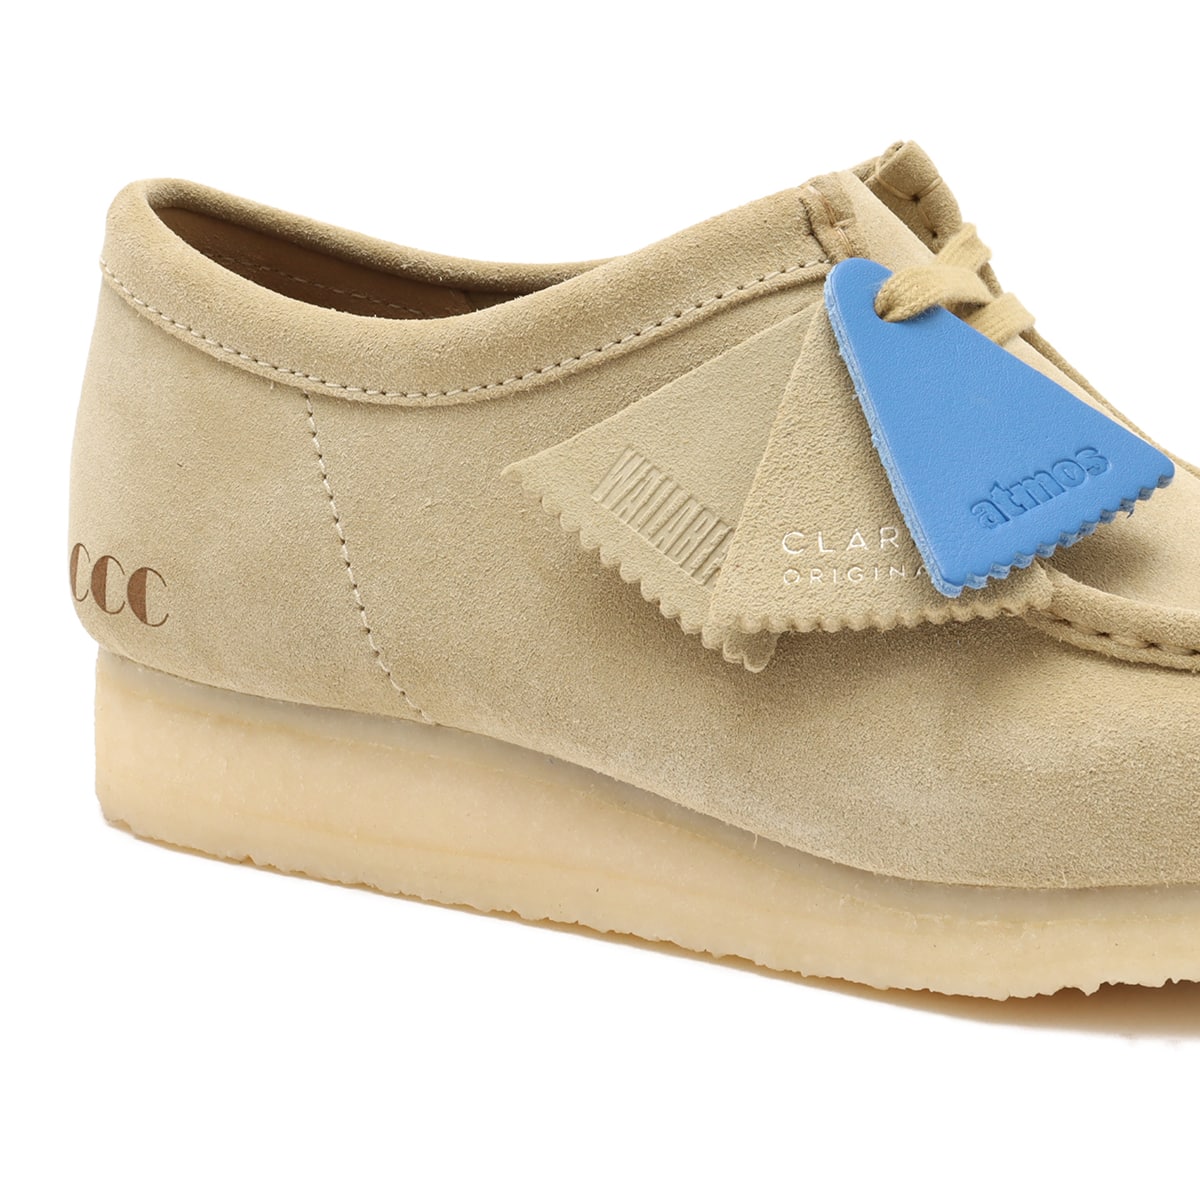 Clarks Wallabee CCC atmos Maple 24SP-S